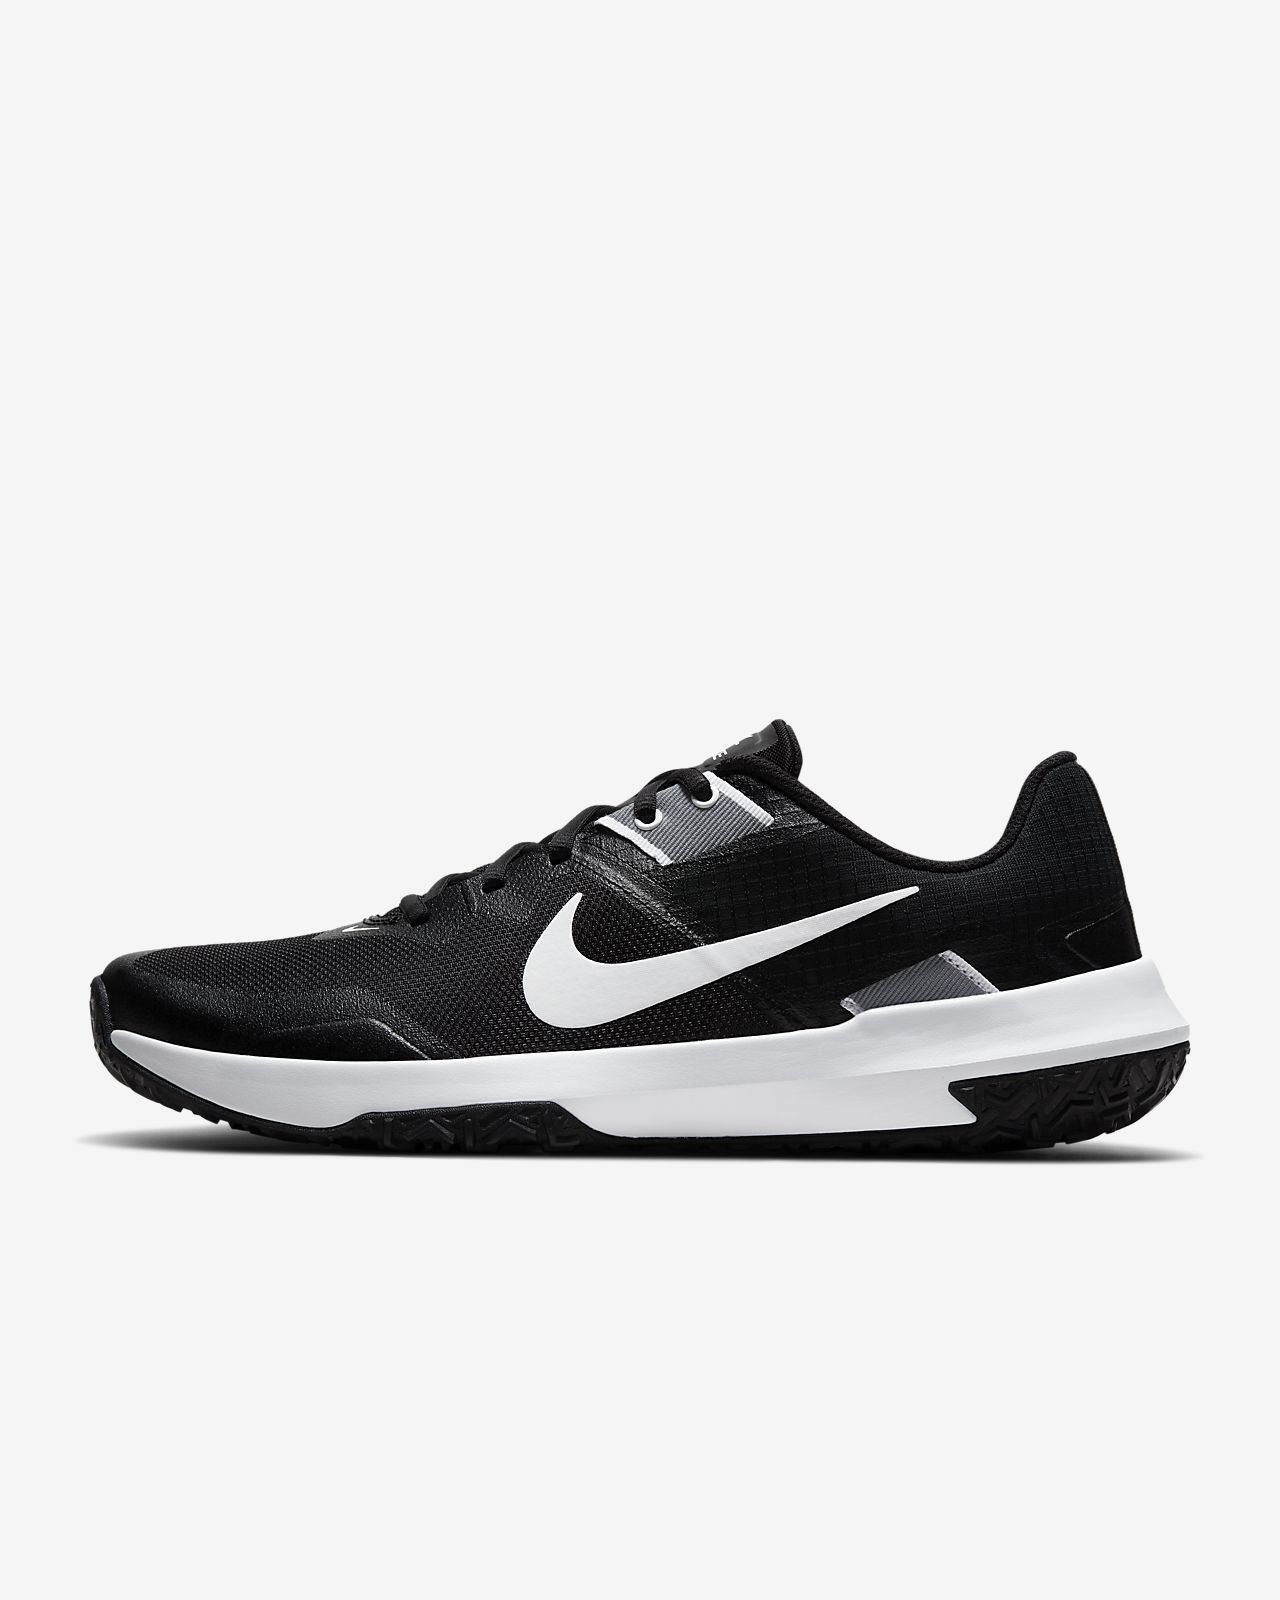 nike varsity compete trainer 2 review